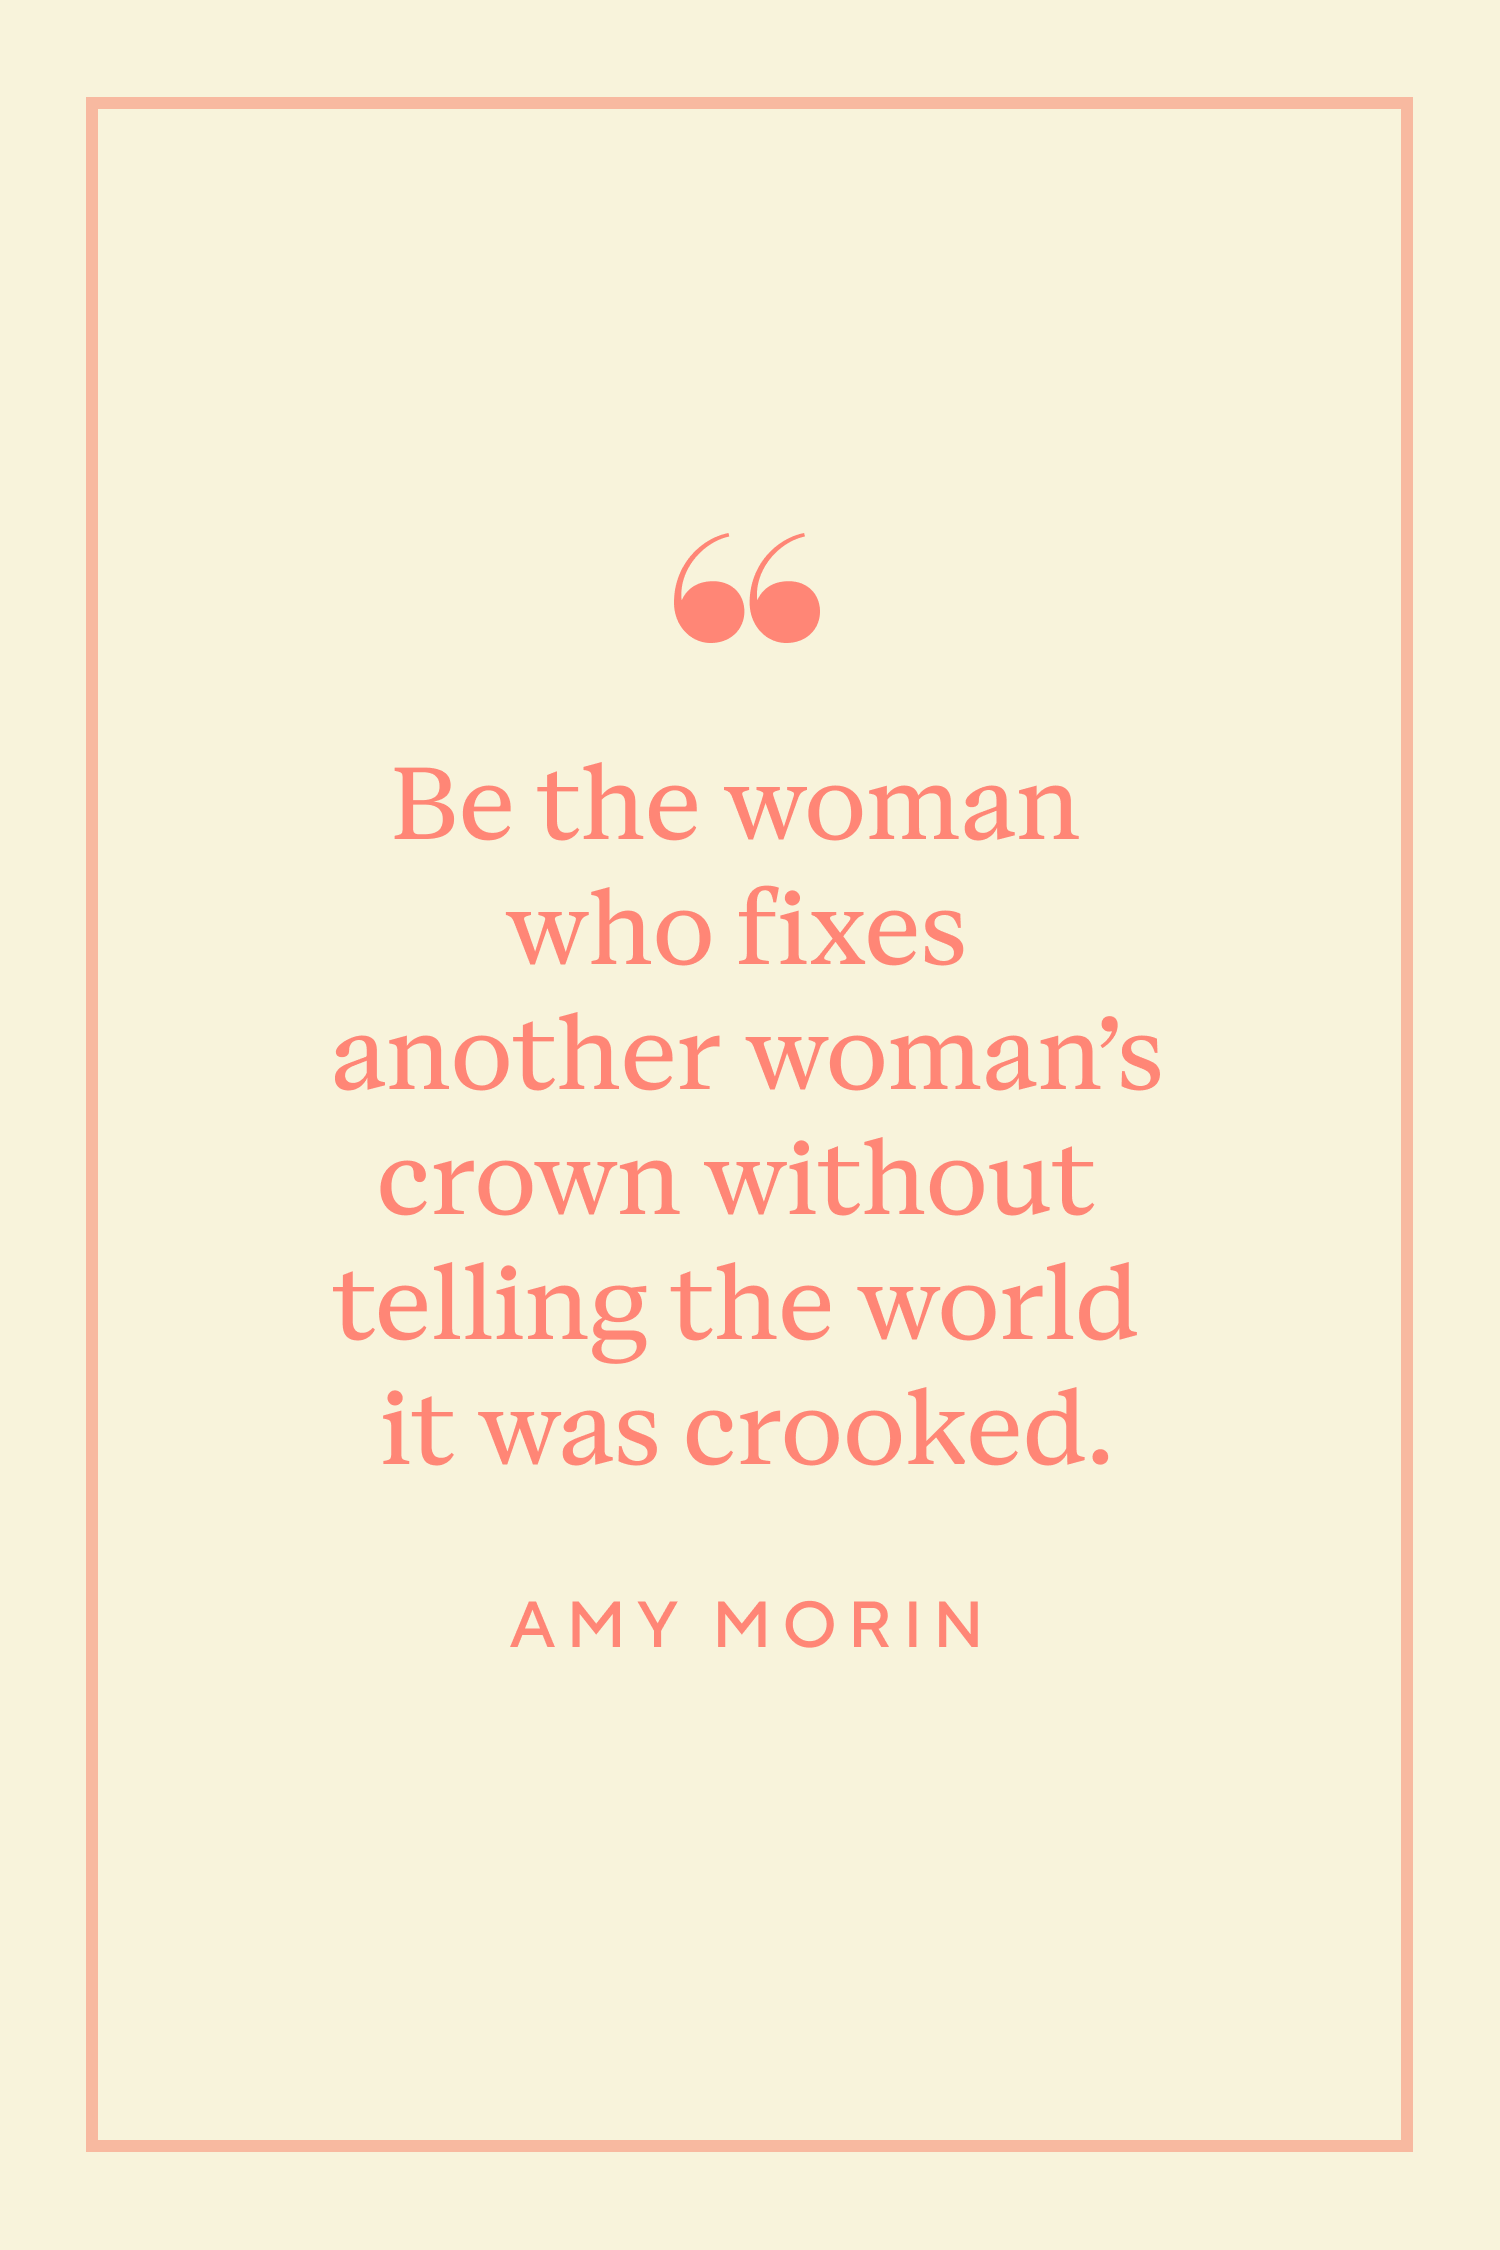 60 Inspirational Quotes for Women About Empowerment